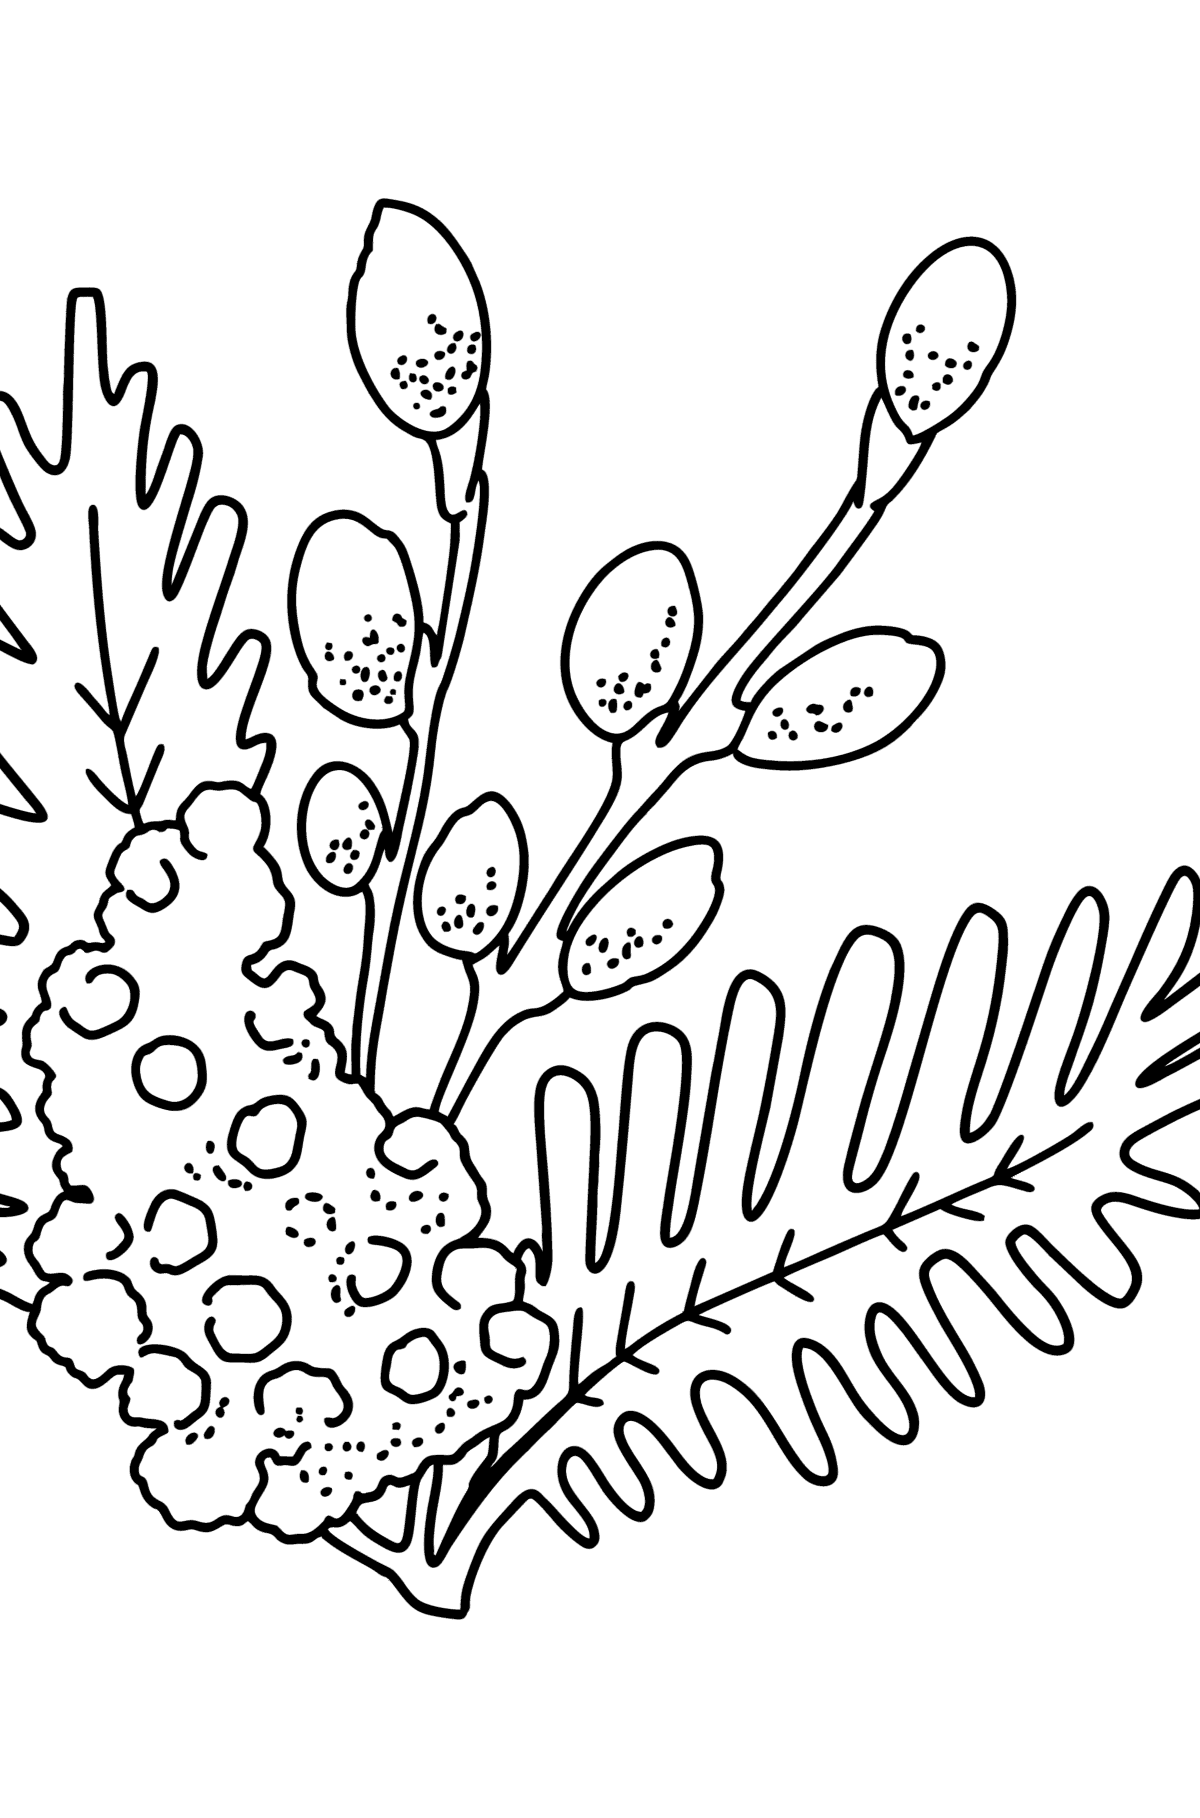 Coloring page - Mimosa and Pussy Willow - Coloring Pages for Kids